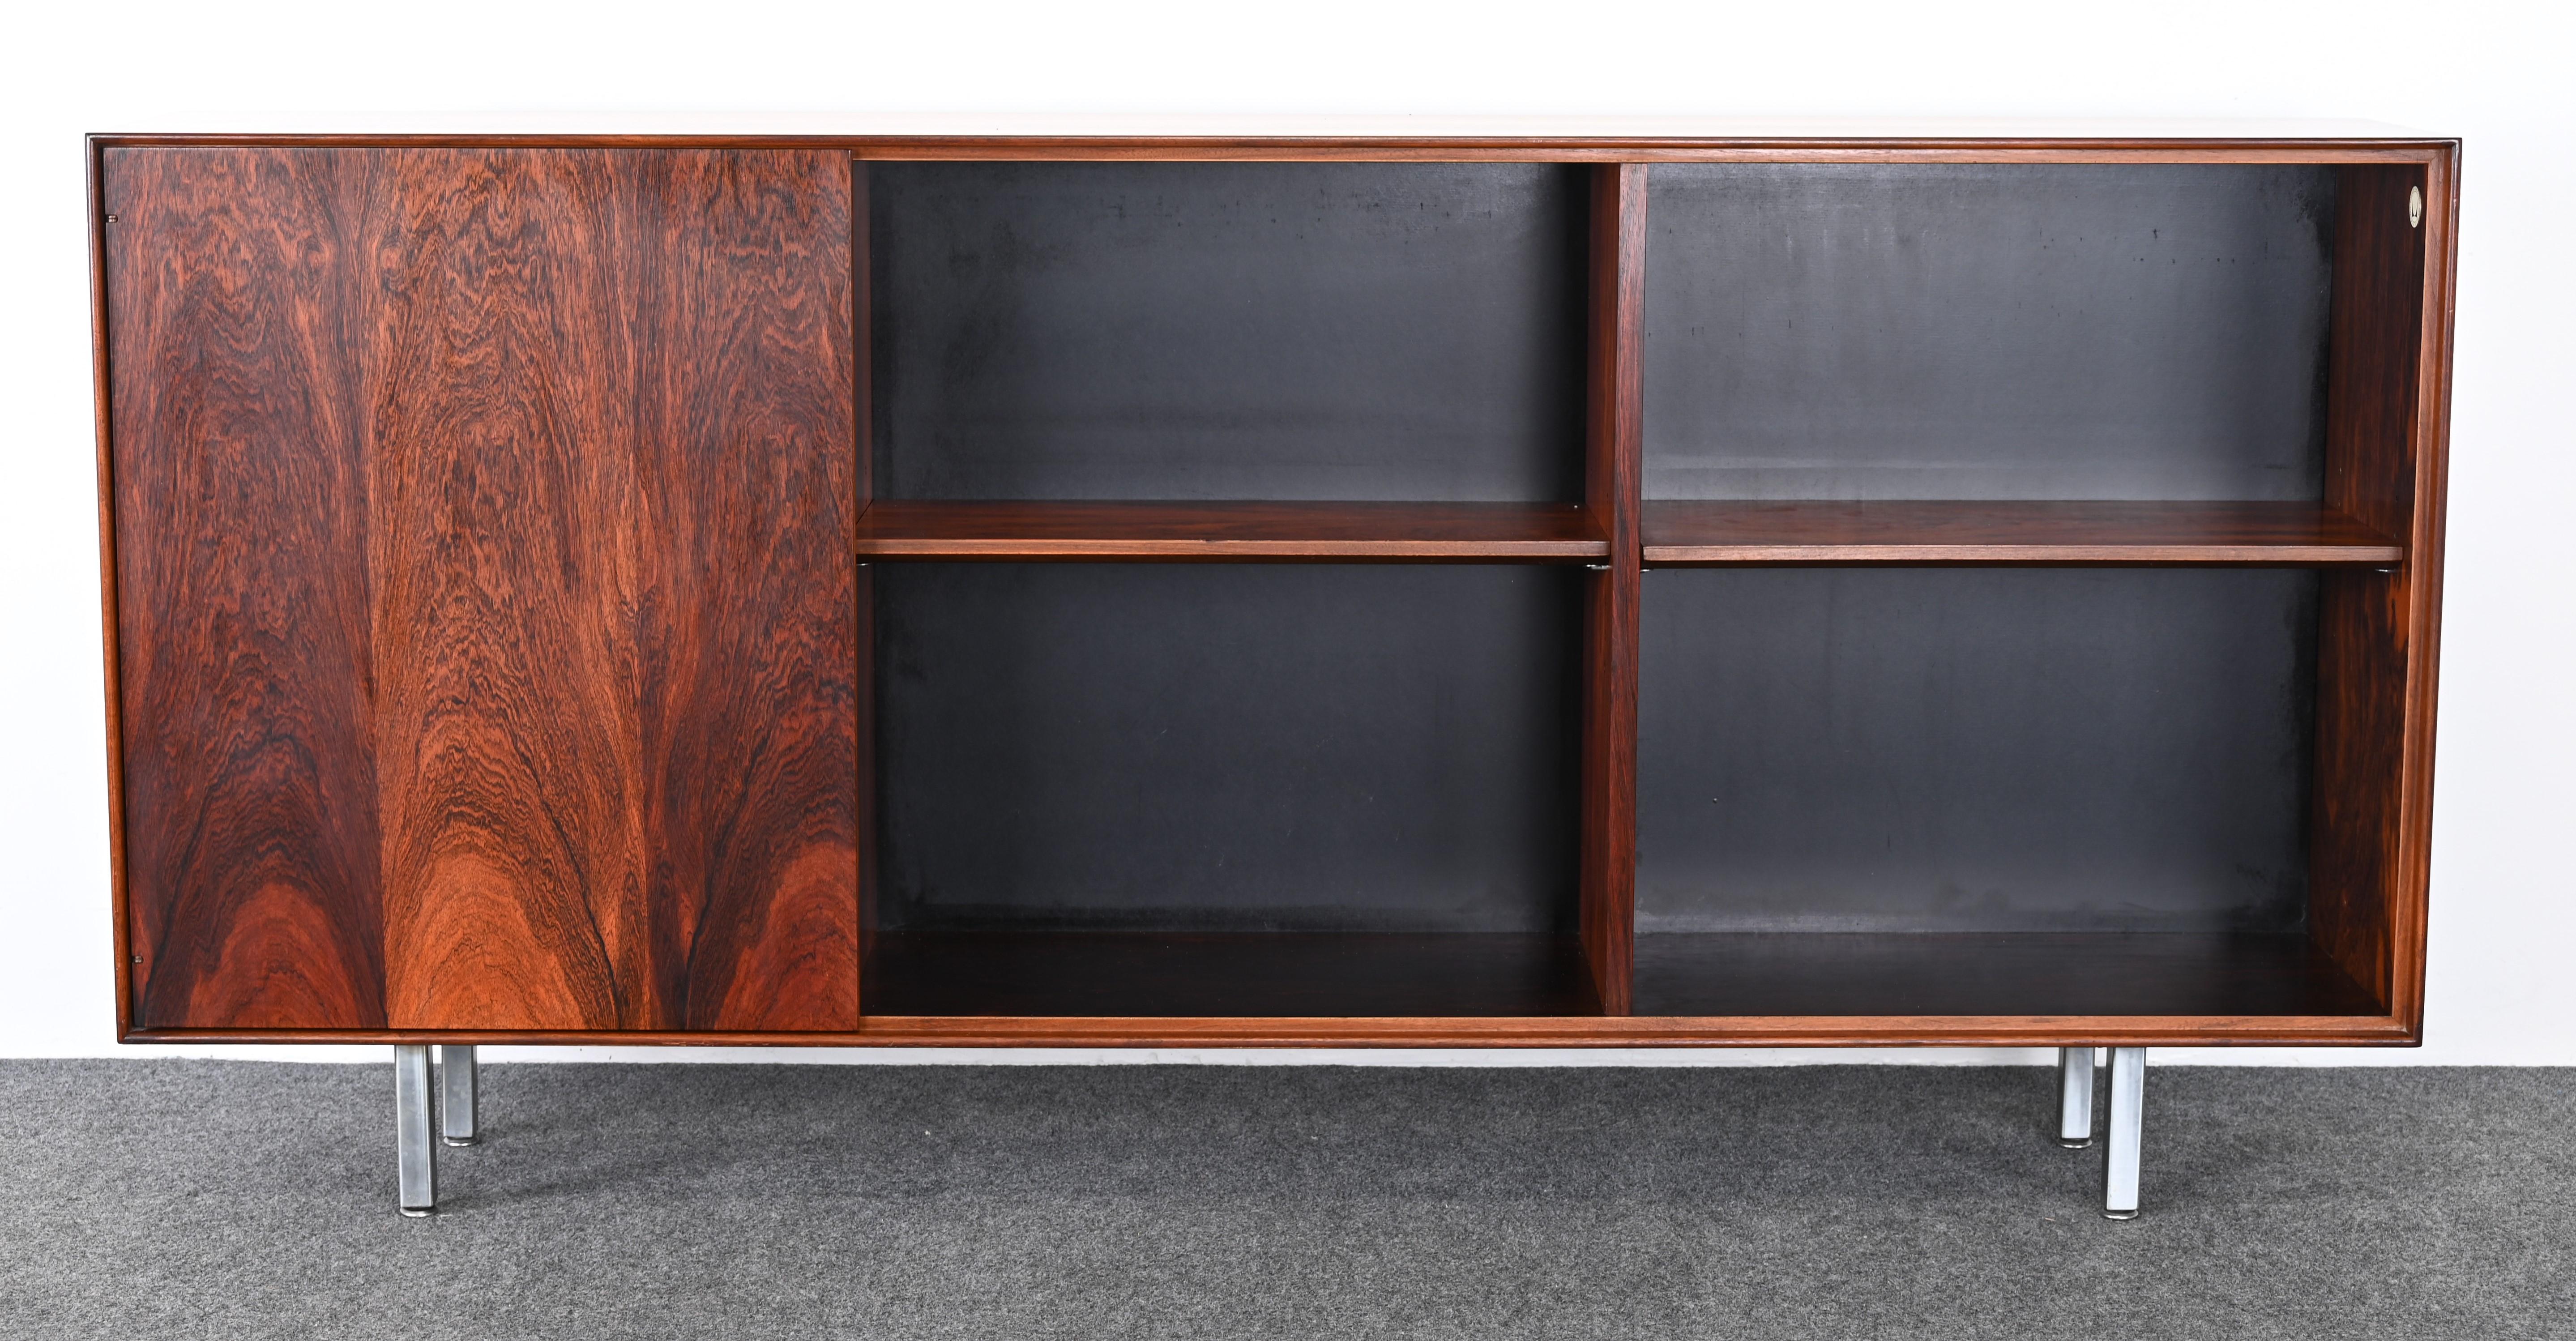 American Rosewood Thin Edge Bookshelf by George Nelson for Herman Miller, 1950s For Sale